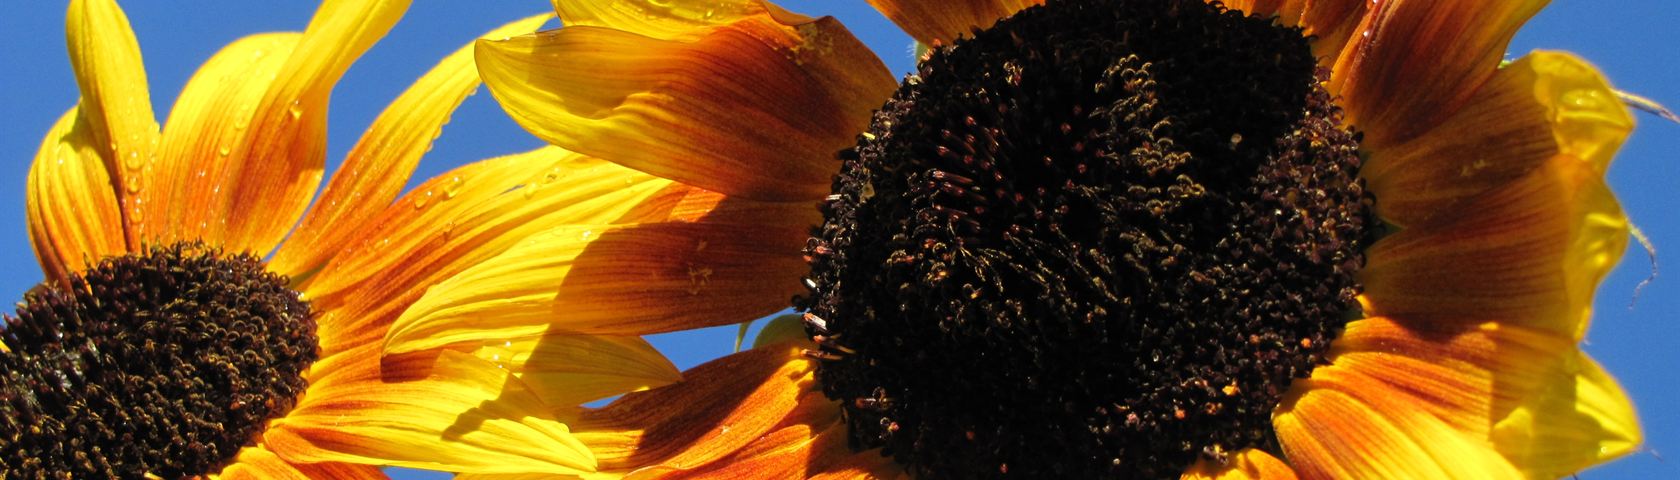 Sunflowers with a Fly